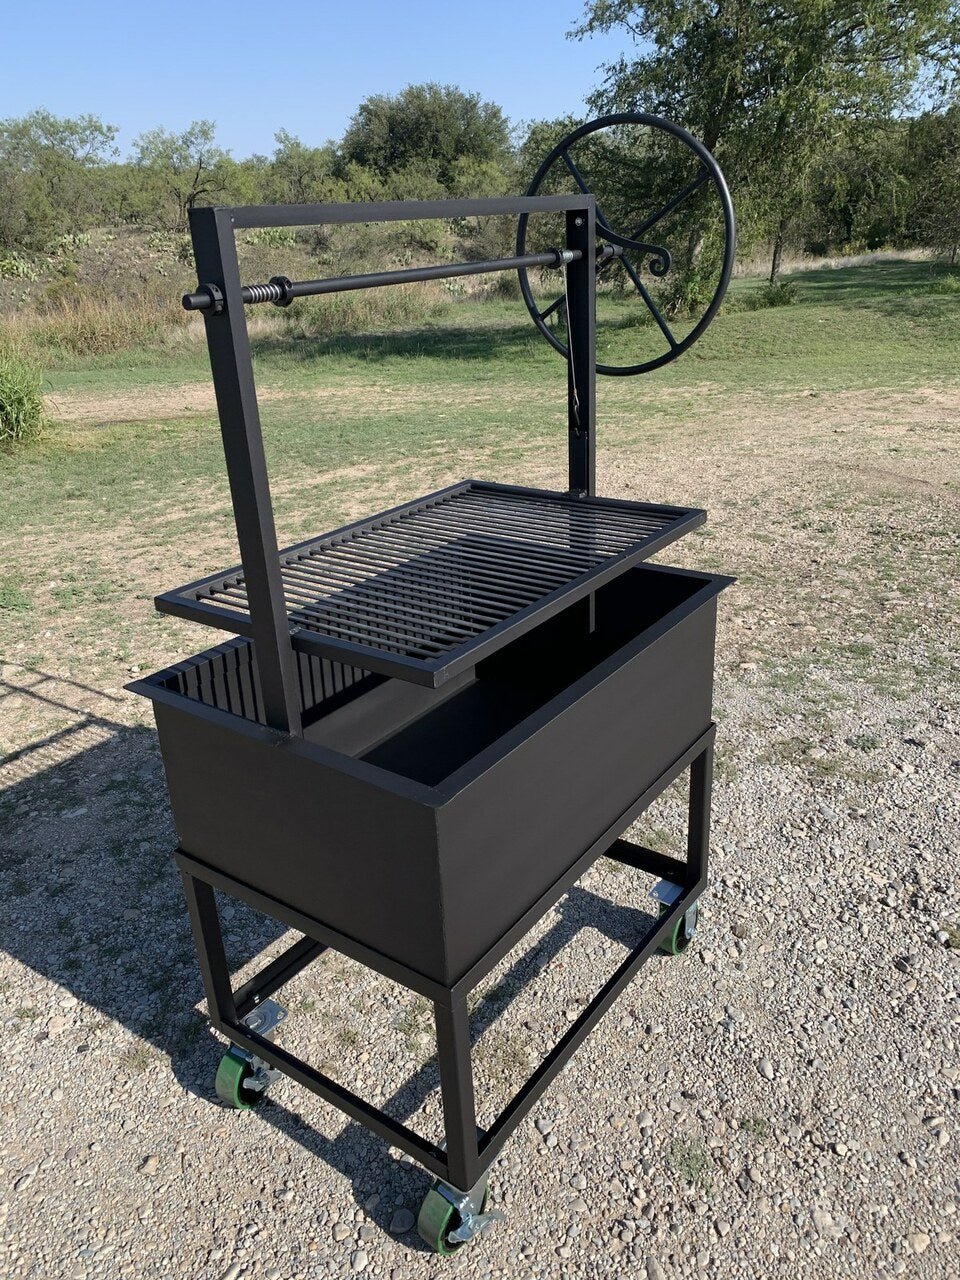 COMMERCIAL Portable Santa Maria BBQ Grill - My Store